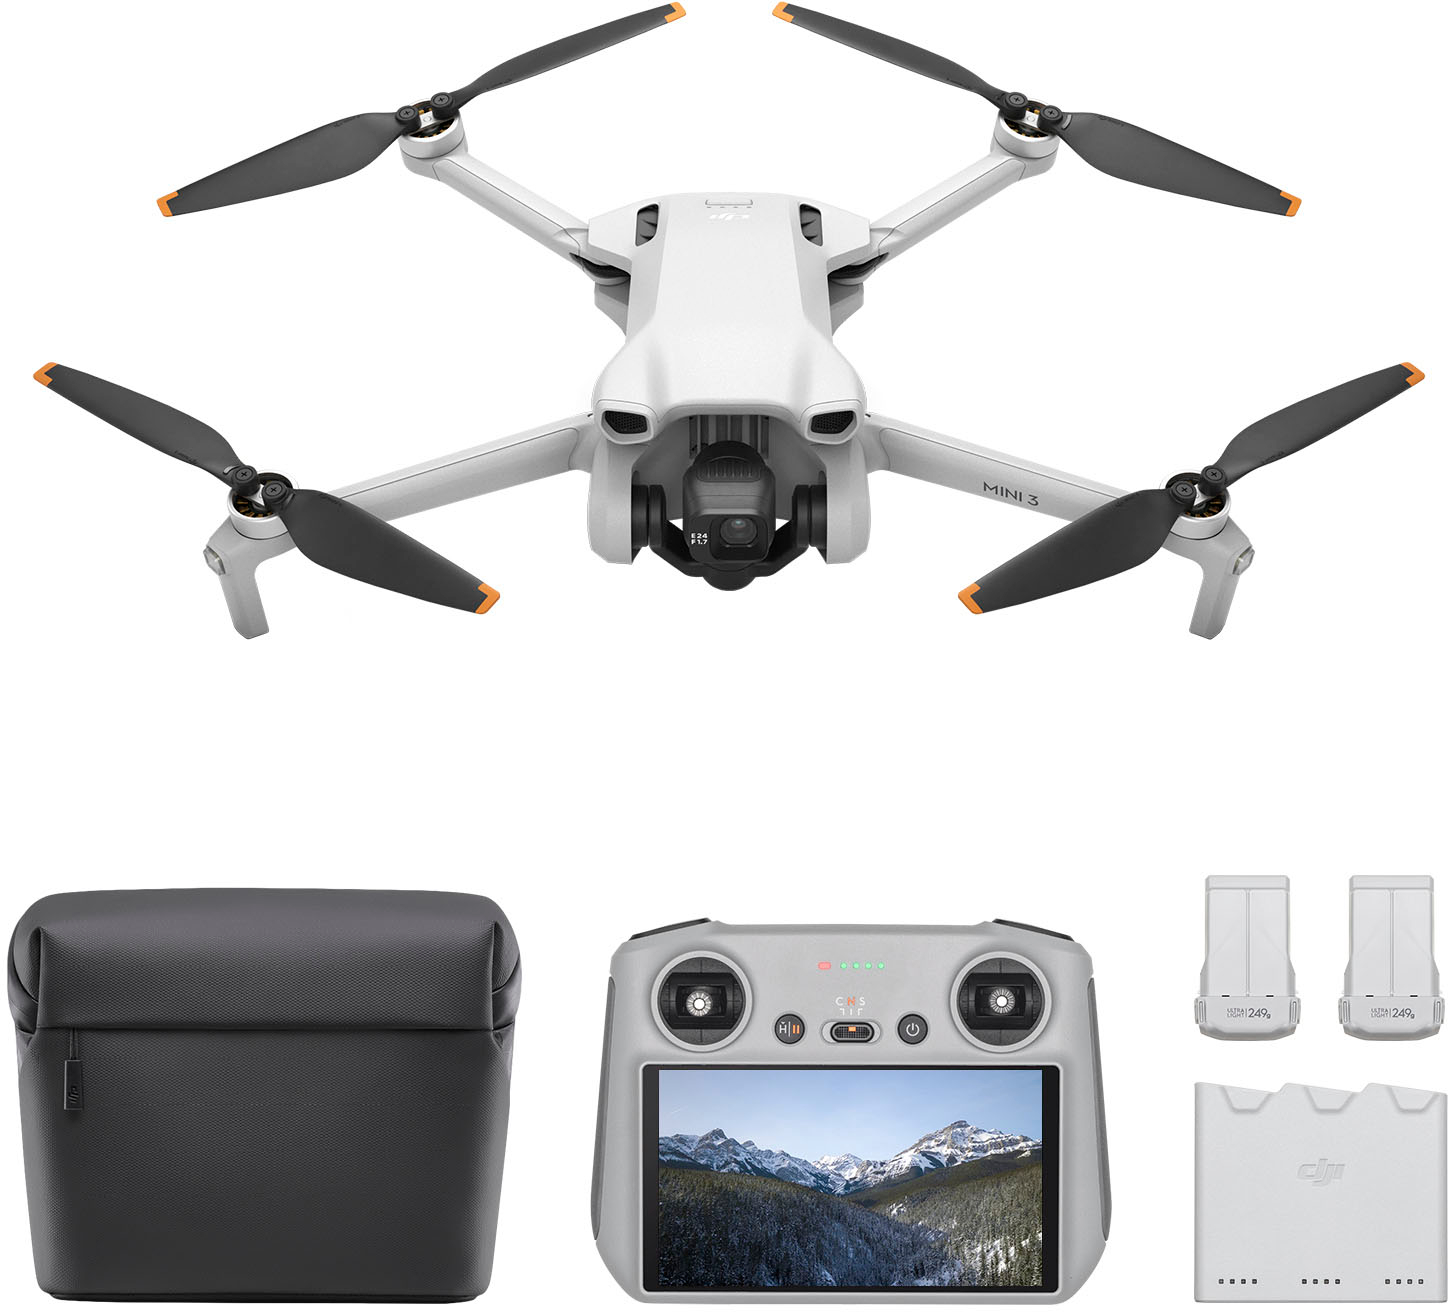  DJI Mini 3 Pro Fly More Kit, Includes Two Intelligent